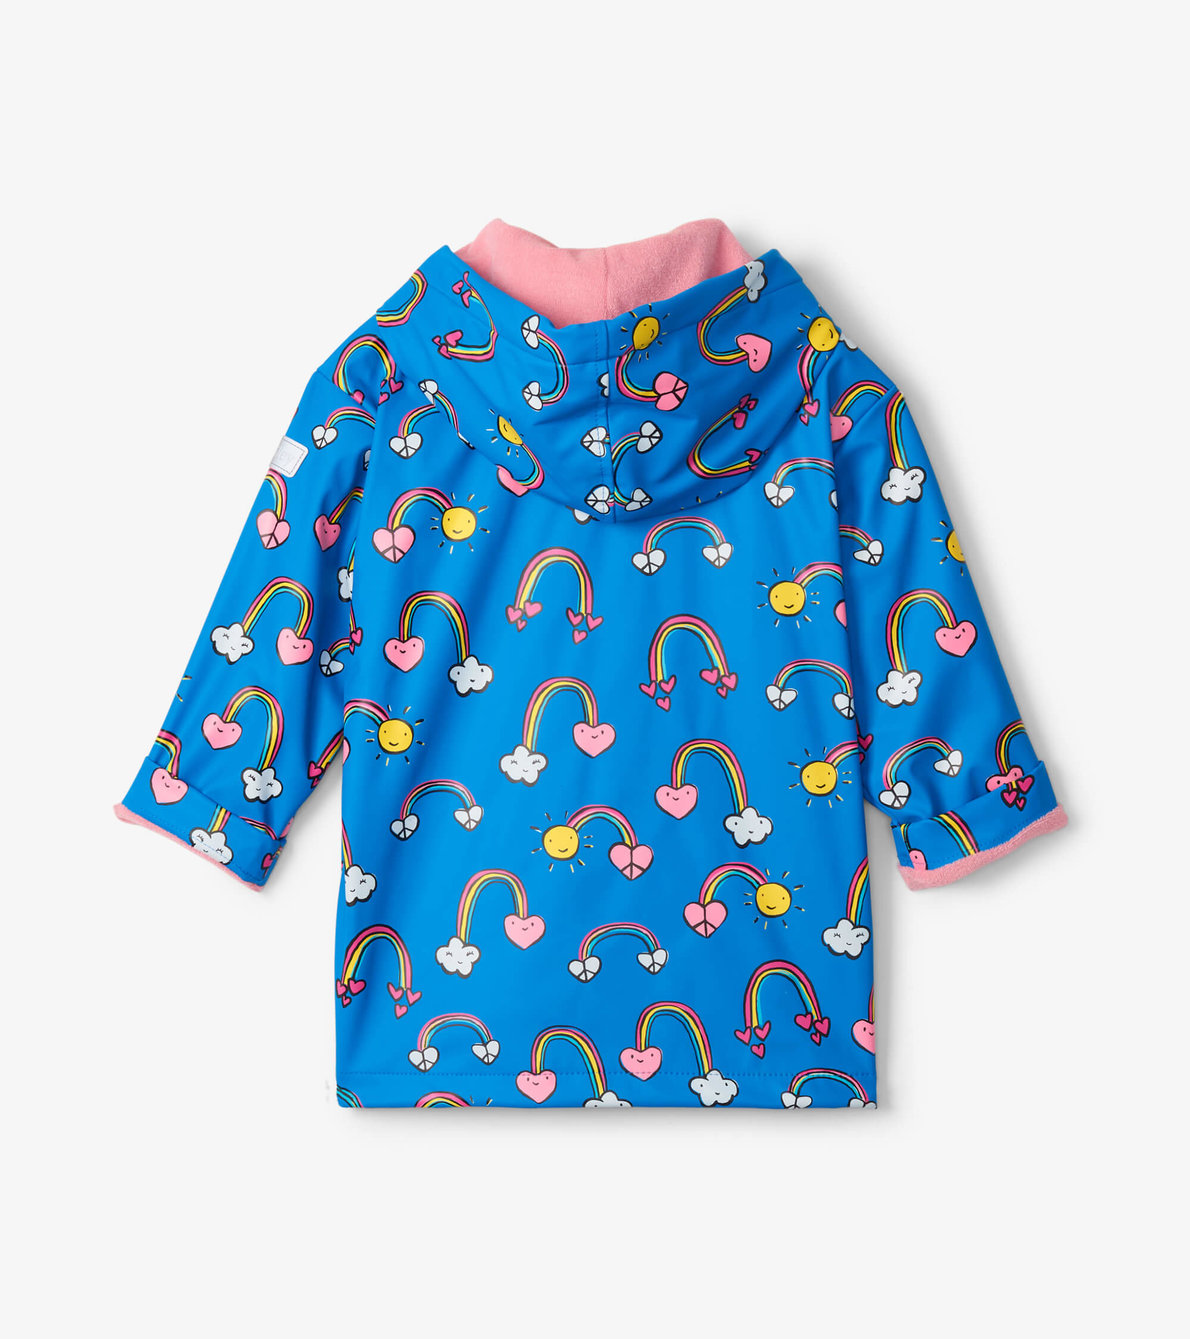 View larger image of Summer Sky Raincoat